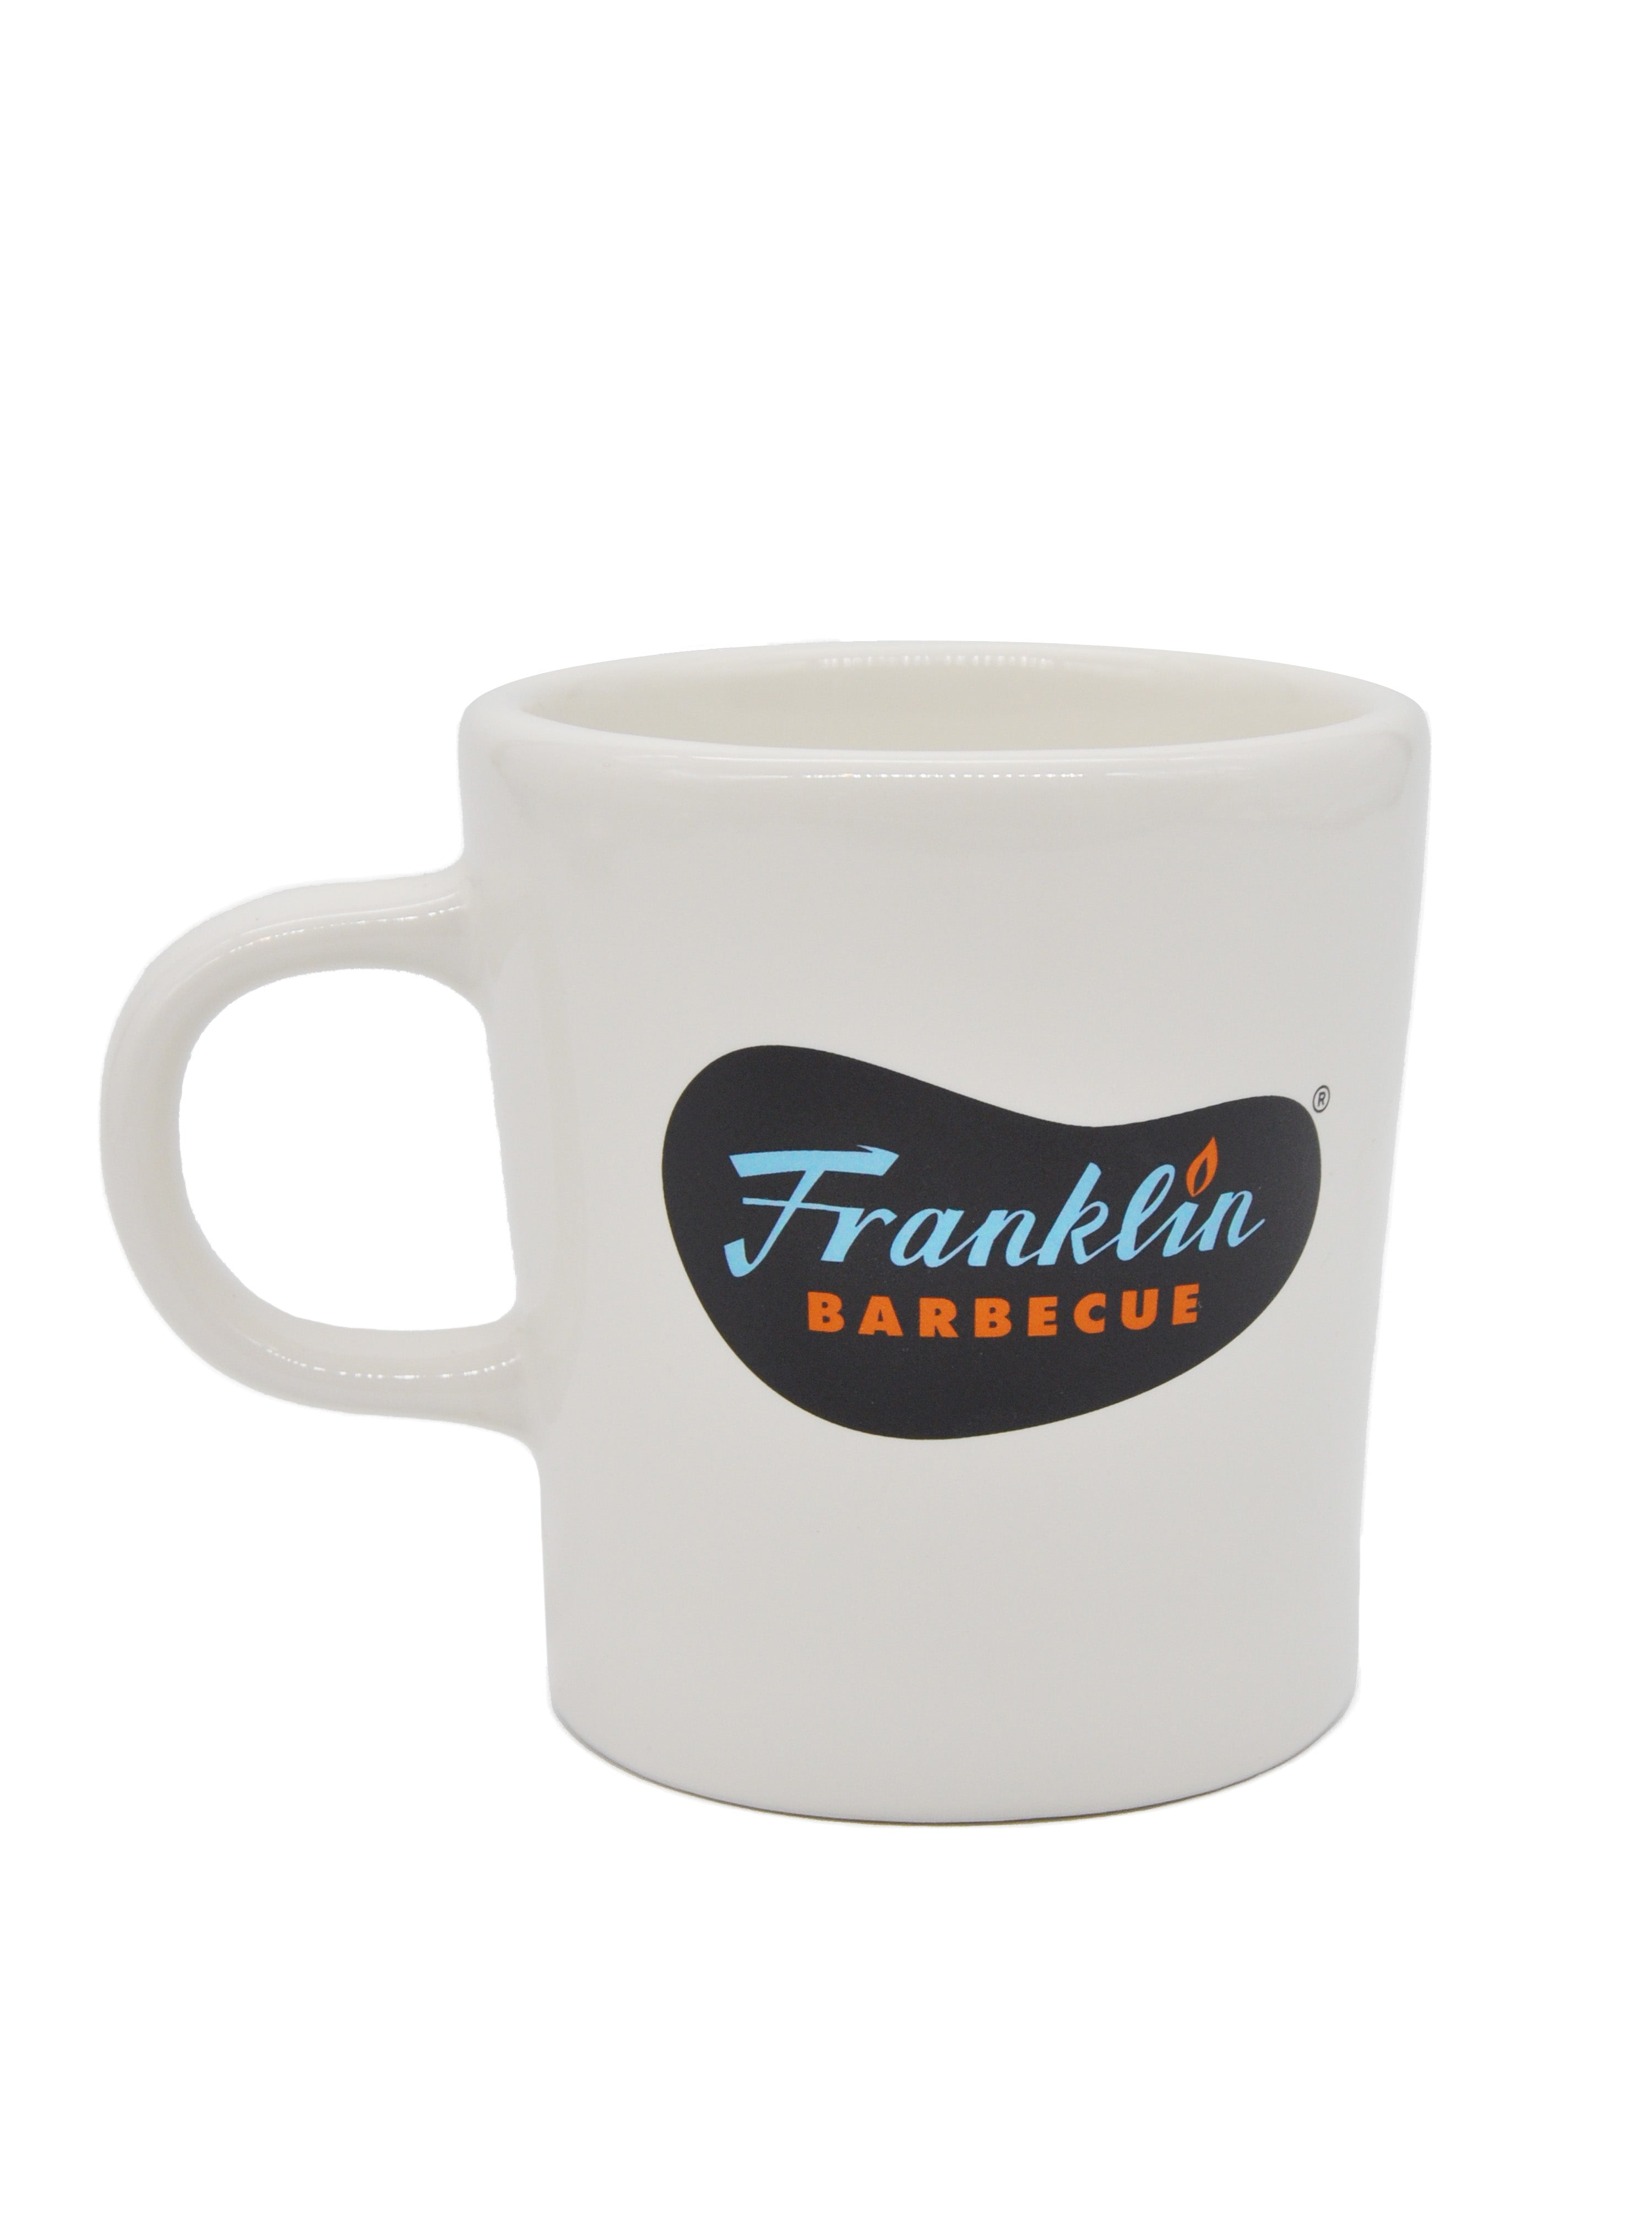 White mug with Franklin Barbecue logo in blue and orange lettering